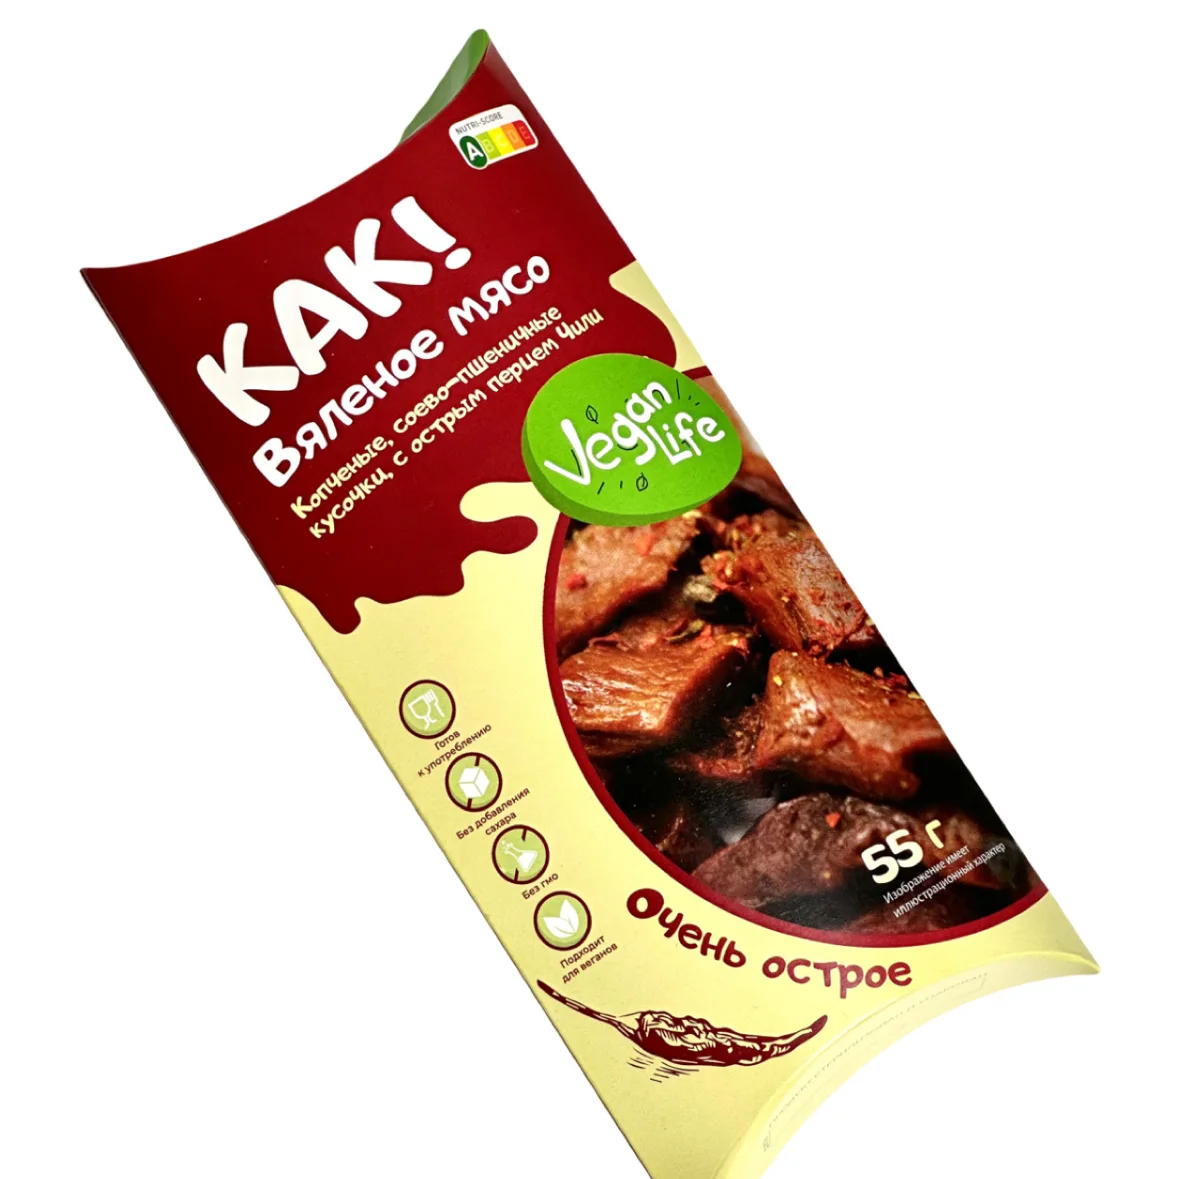 AS DRIED MEAT with hot CHILI pepper (55 g)